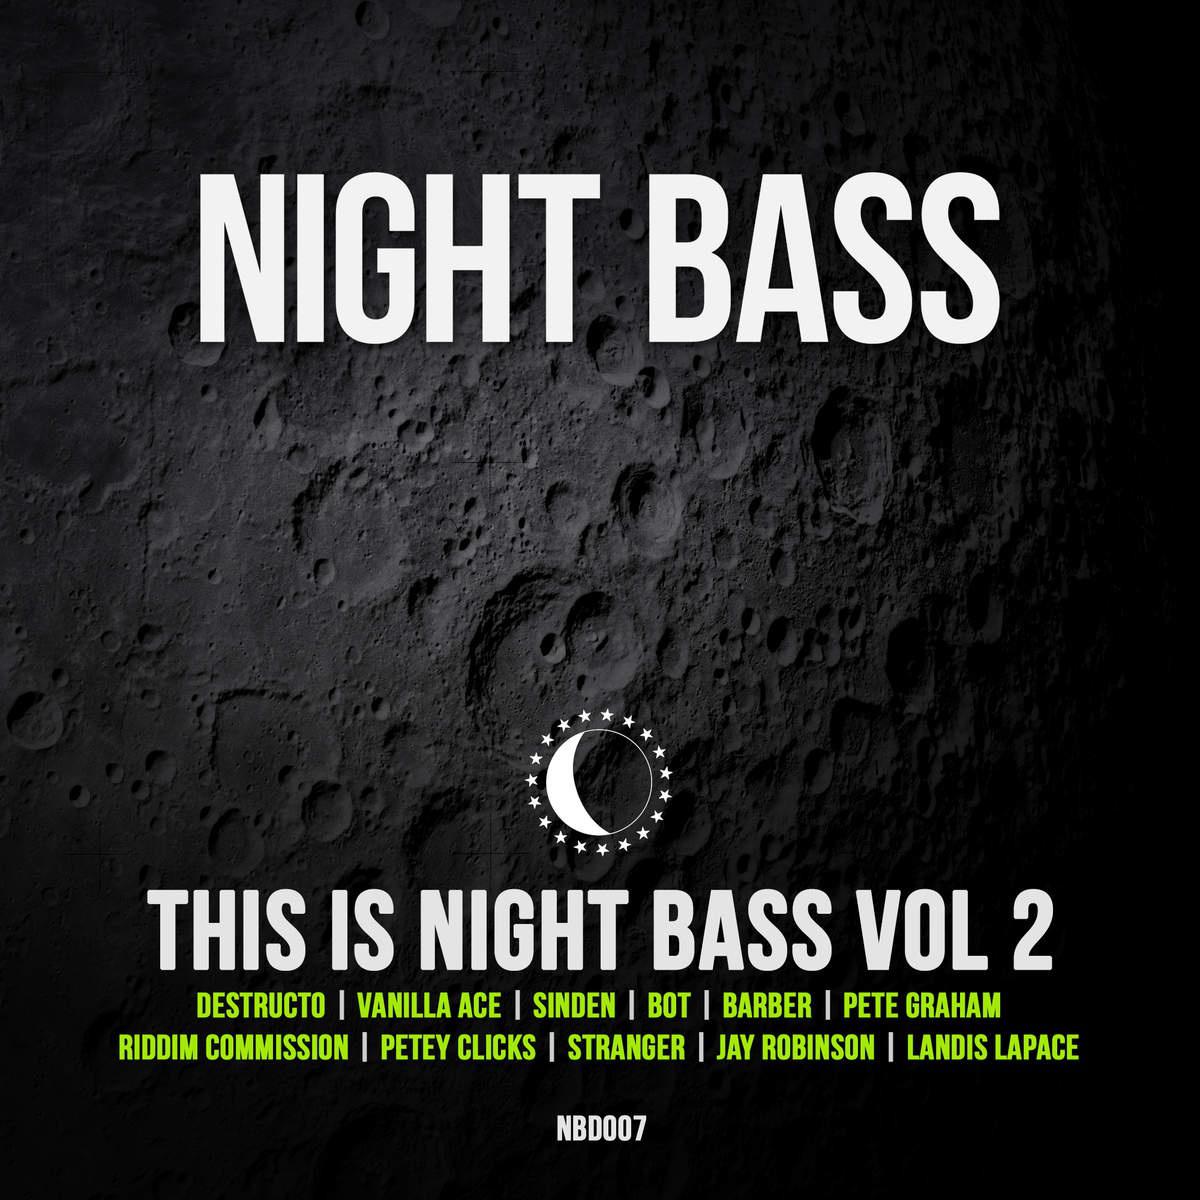 This is Night Bass, Vol. 2